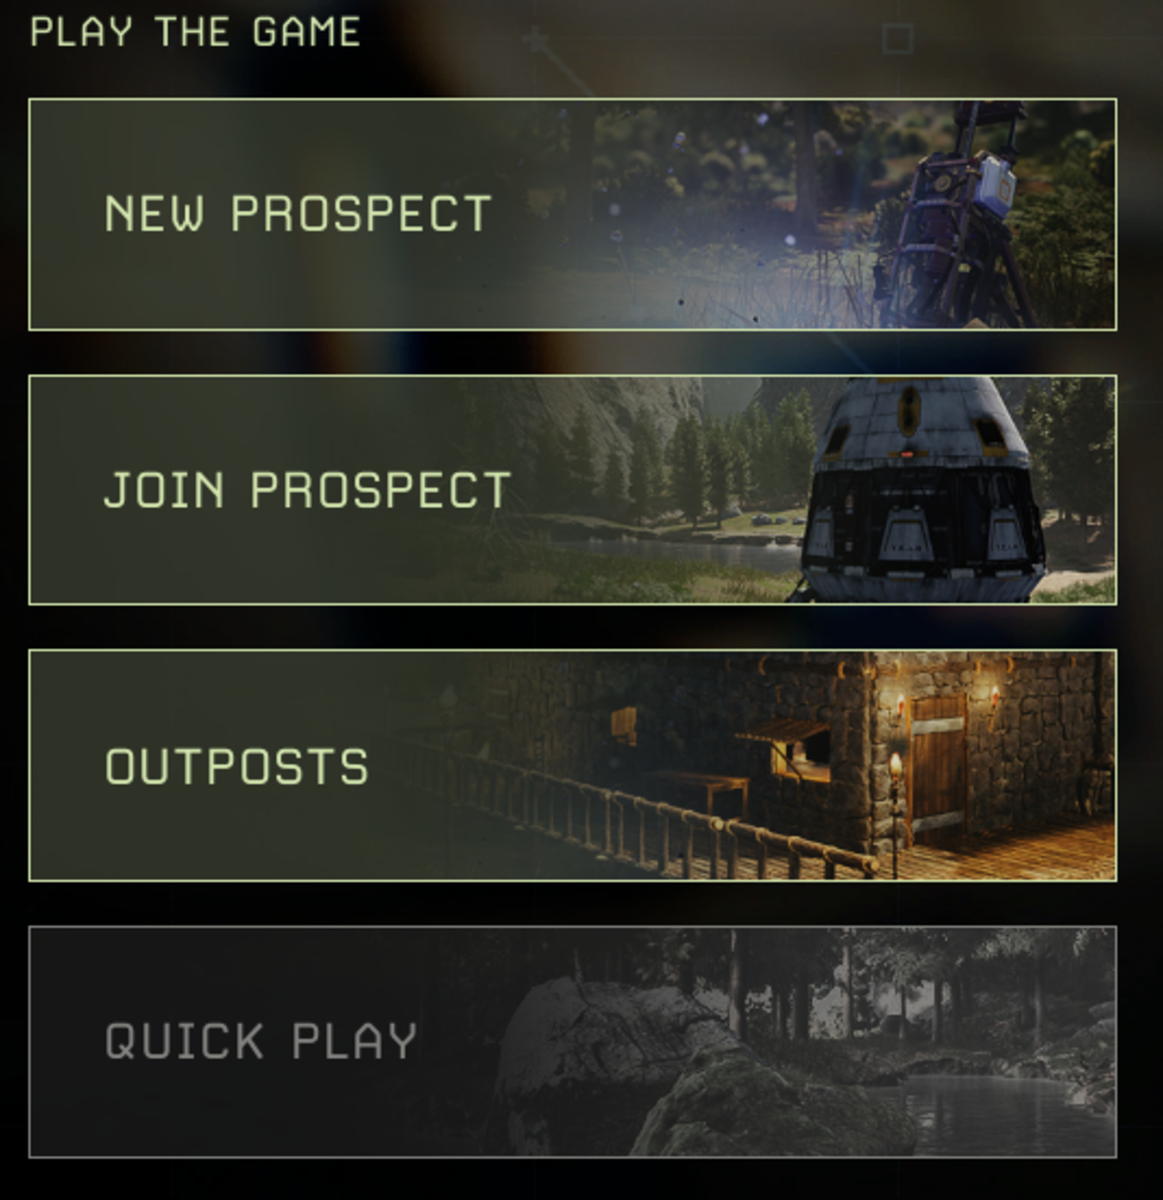 You can create or visit your outpost from the outpost section of the menu after selecting your character.